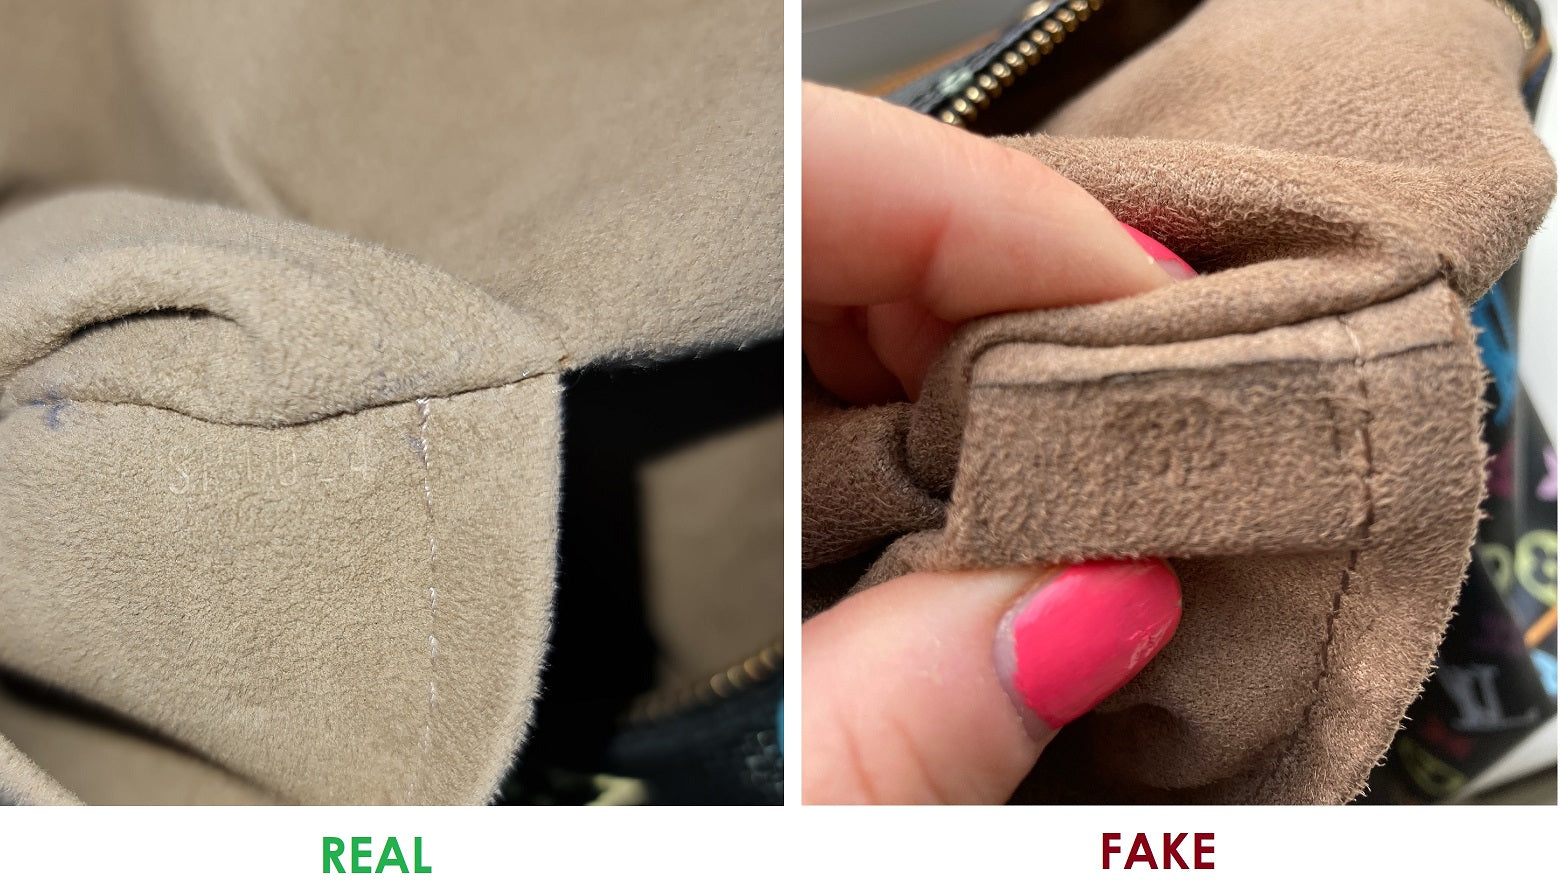 how to tell if a multicolor canvas speedy bag is real or fake by inside interior red lining